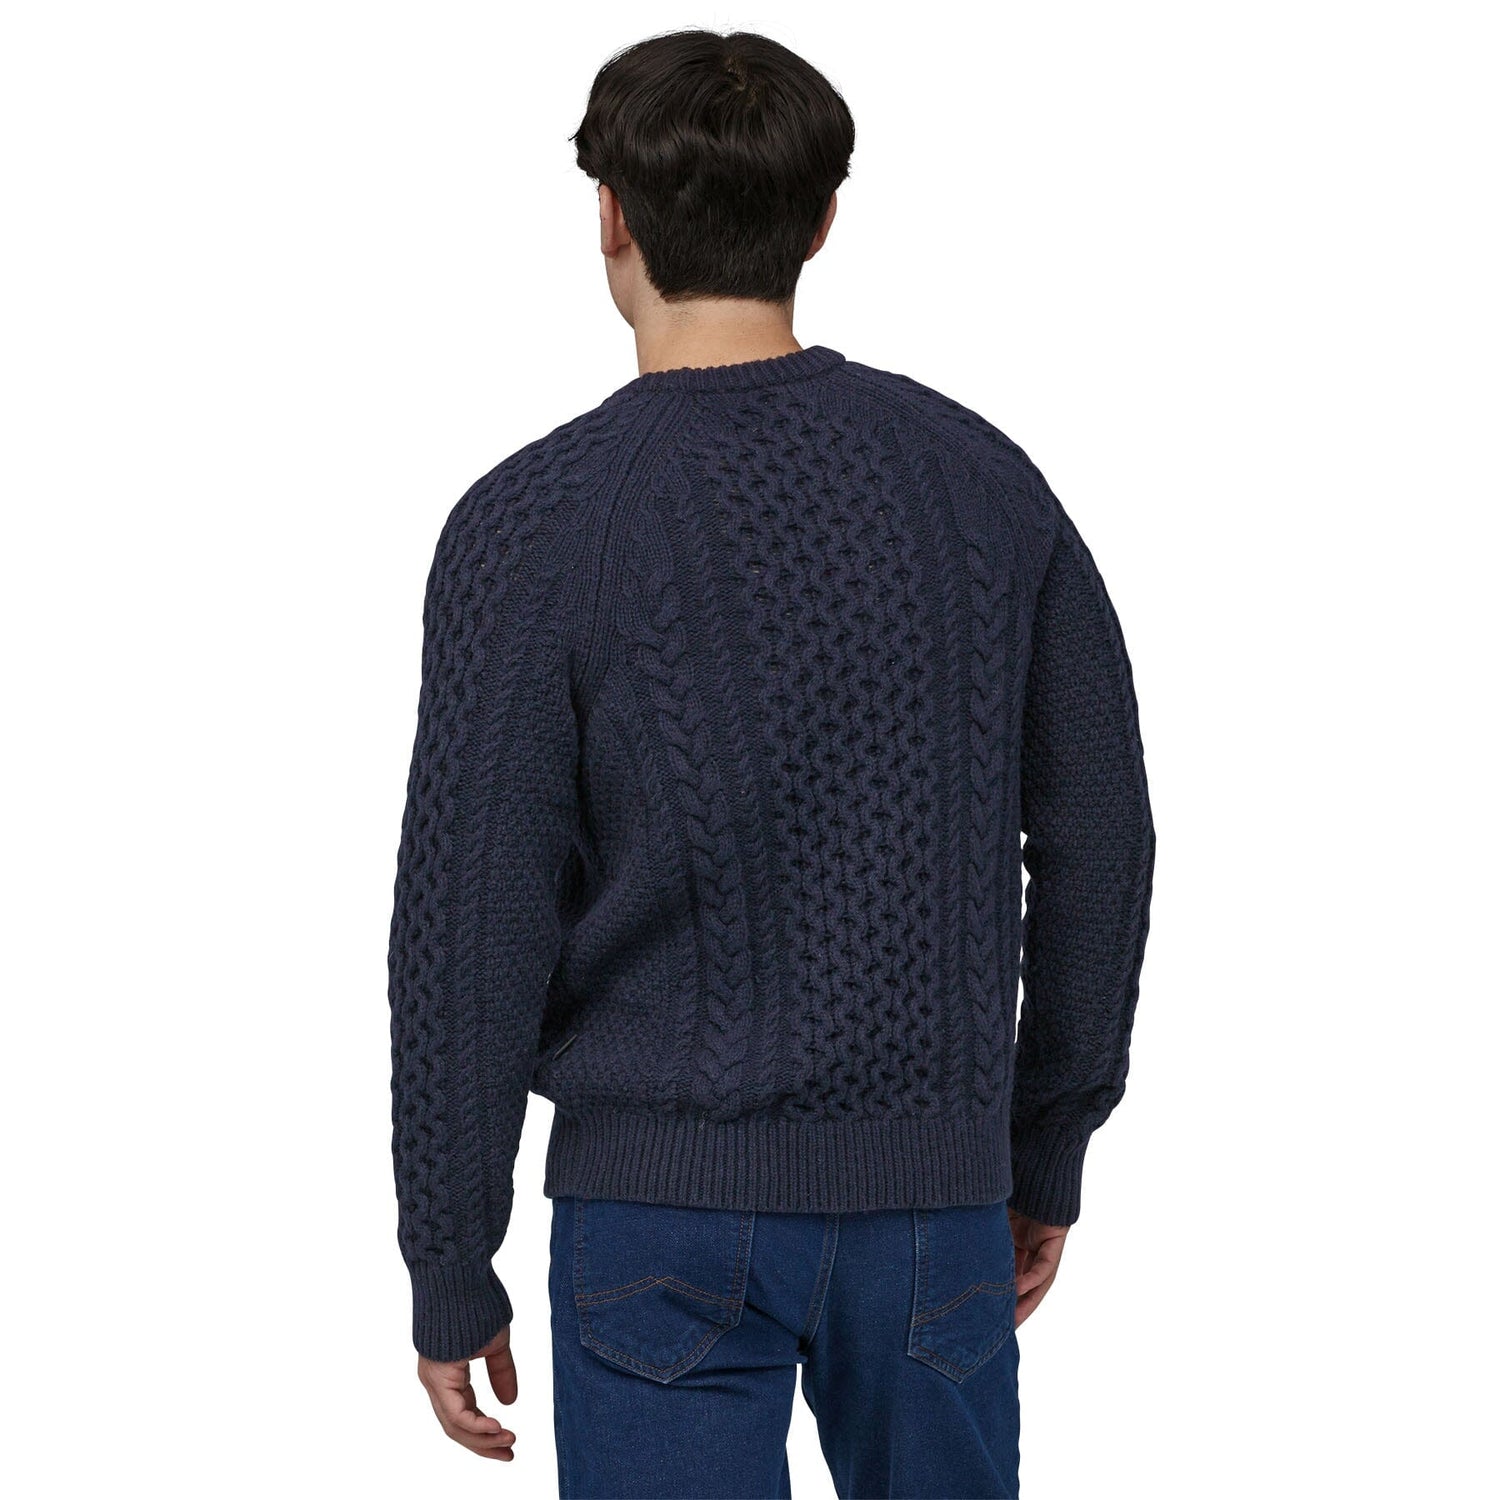 Patagonia Unisex Cable Knit Crewneck Sweater - Recycled Wool & Recycled Nylon New Navy Shirt